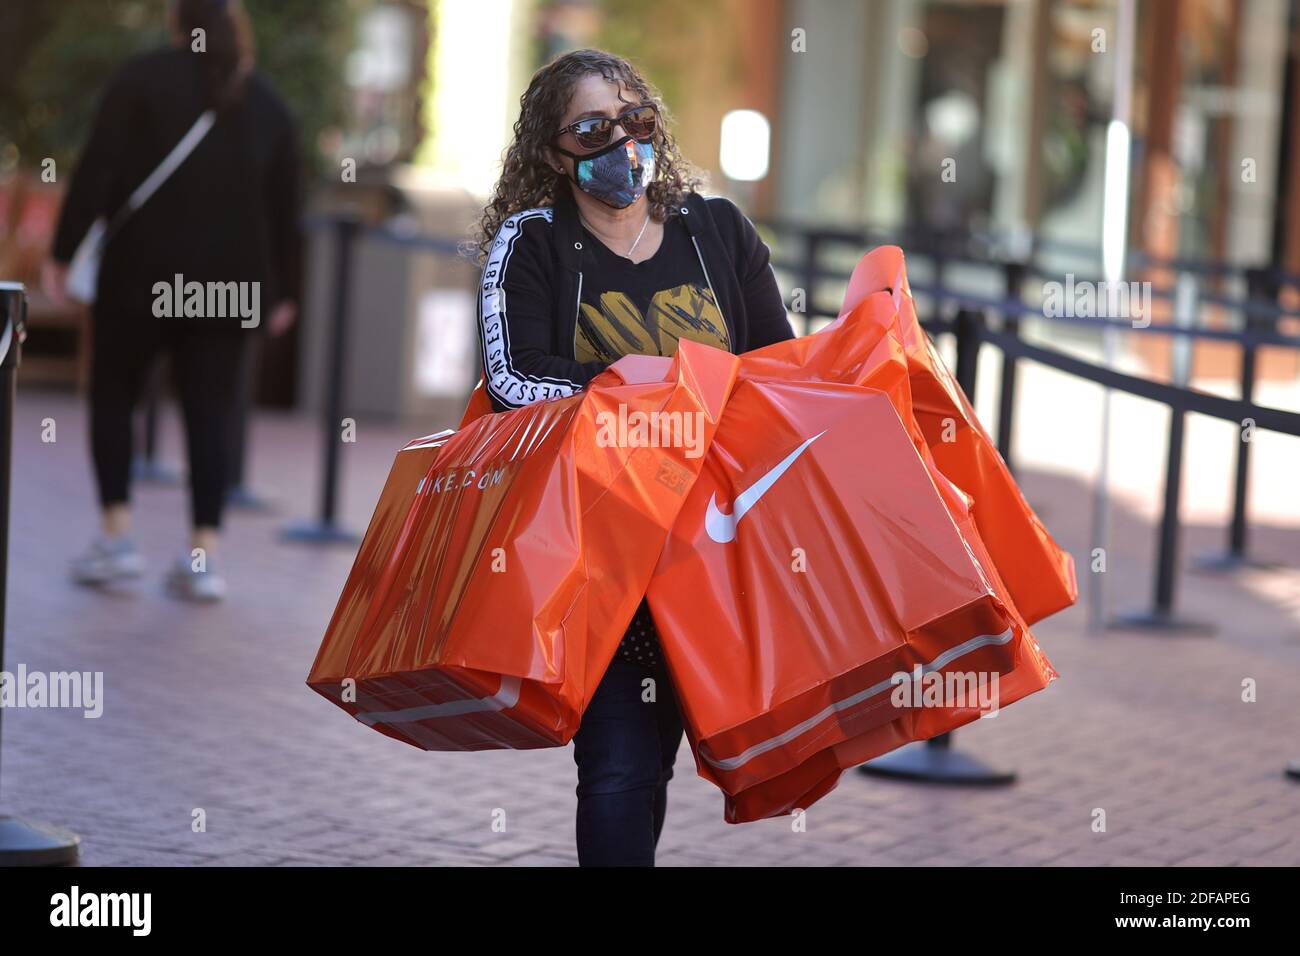 observación Ingenioso Bebé A woman carries Nike shopping bags at the Citadel Outlet mall, as the  global outbreak of